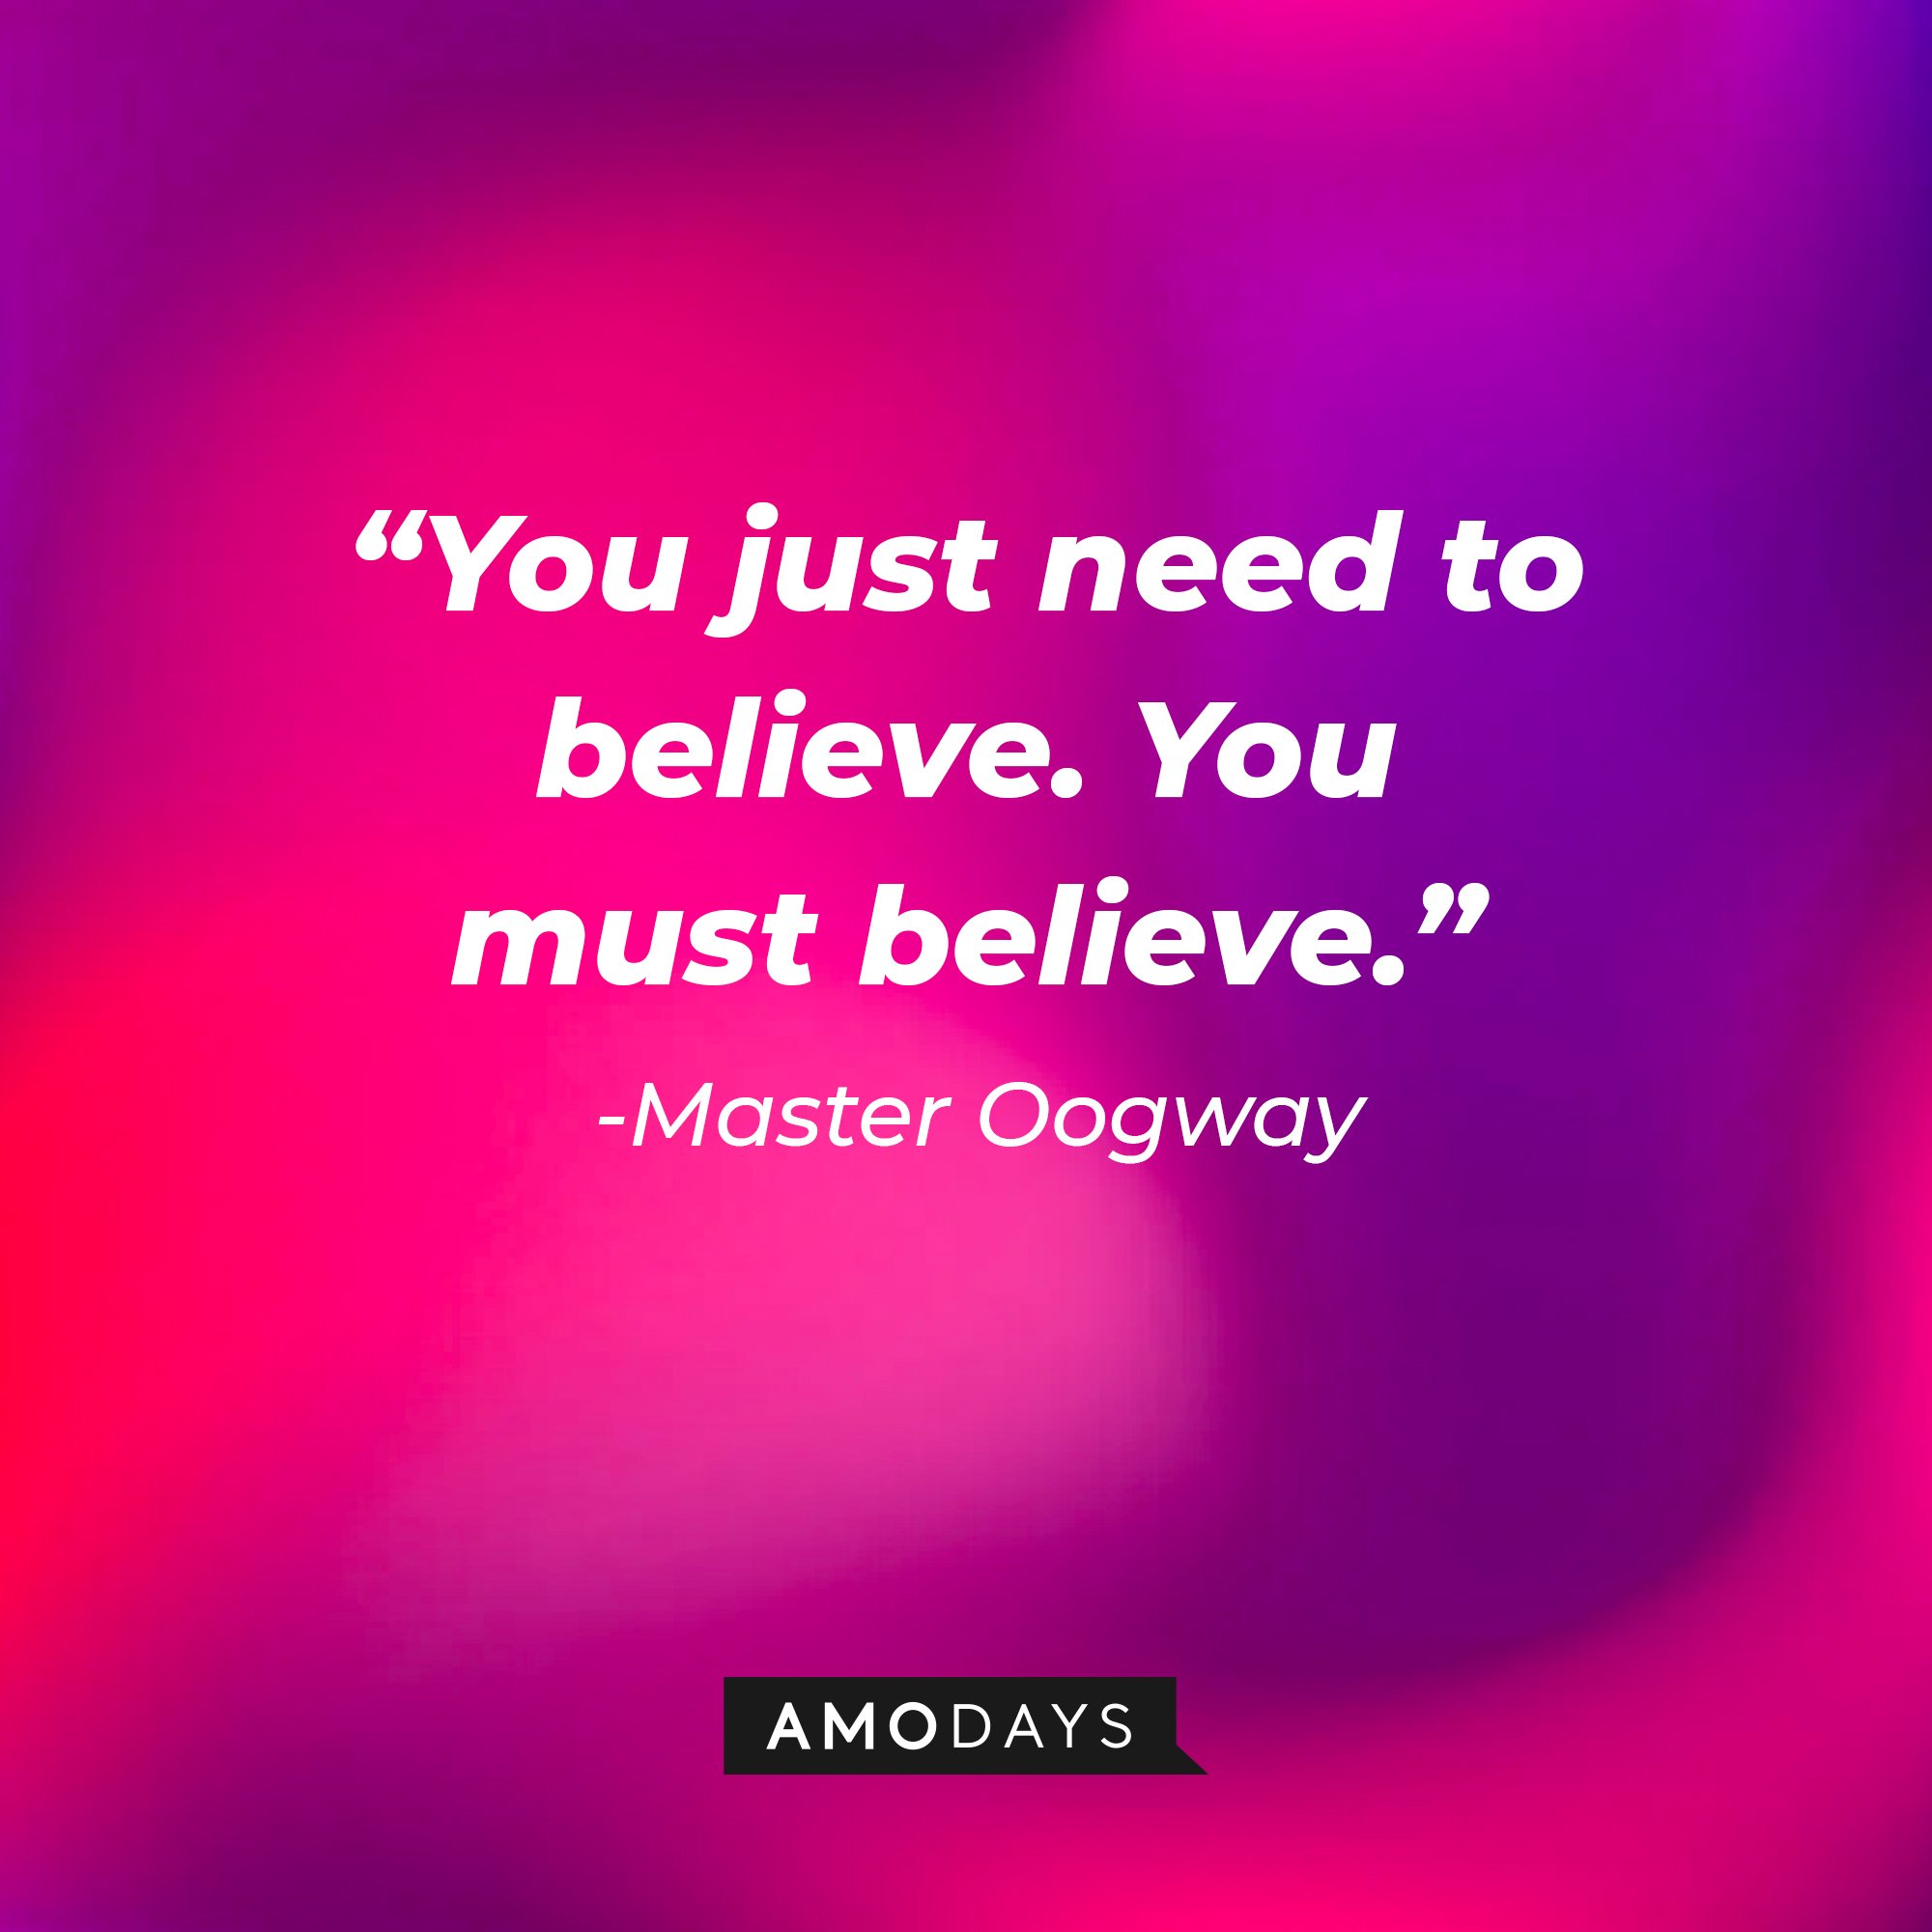 Master Oogway's quote: “You just need to believe. You must believe.” | Image: Amodays